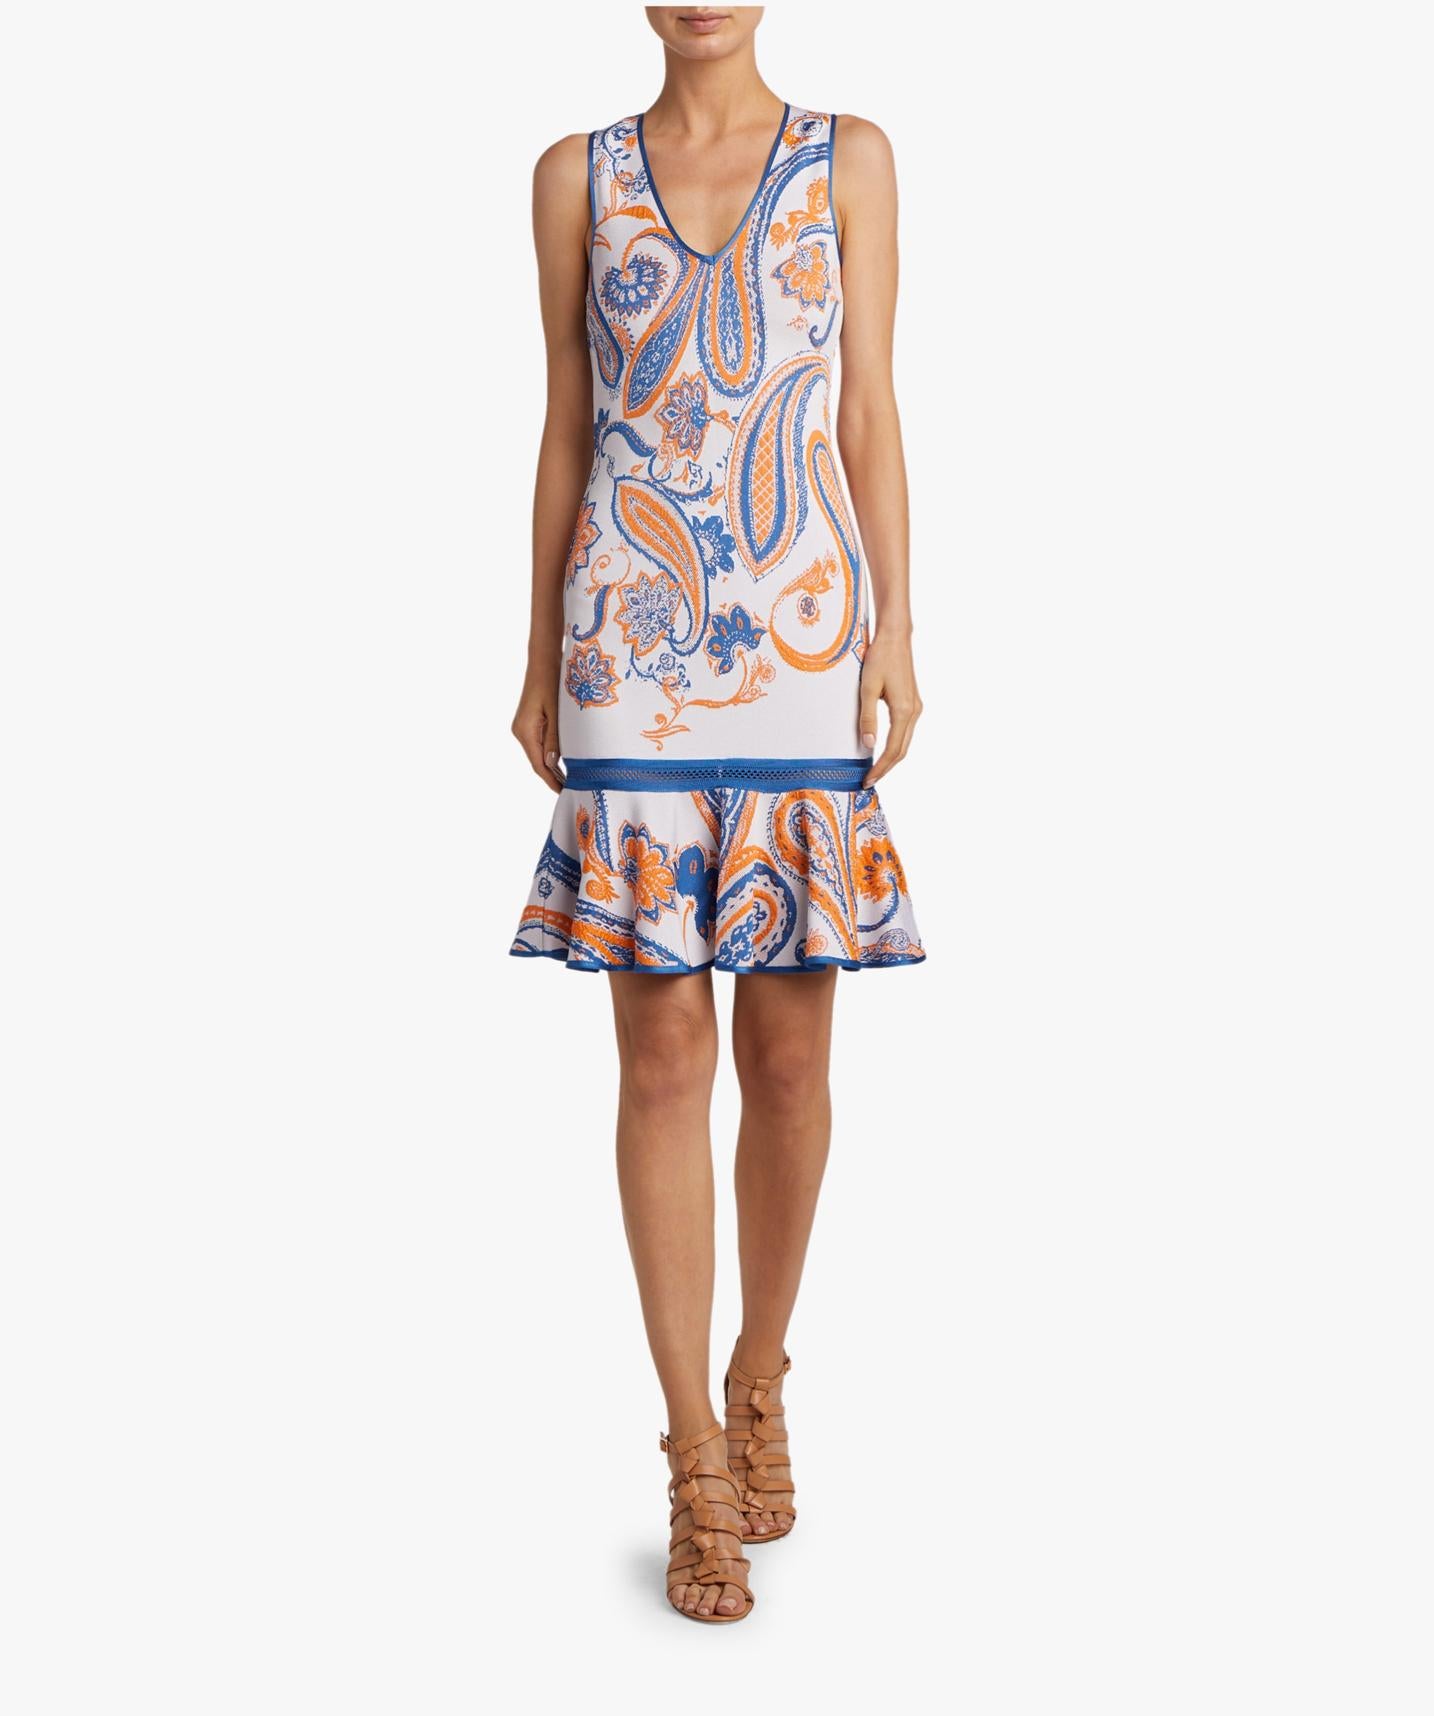 This Roberto Cavalli sleeveless cocktail dress features a vibrant orange and blue paisley print, a V-neckline, and a fitted silhouette with a trumpet hem. It is the perfect dress for a special occasion, day or night. Brand new with tags. Made in